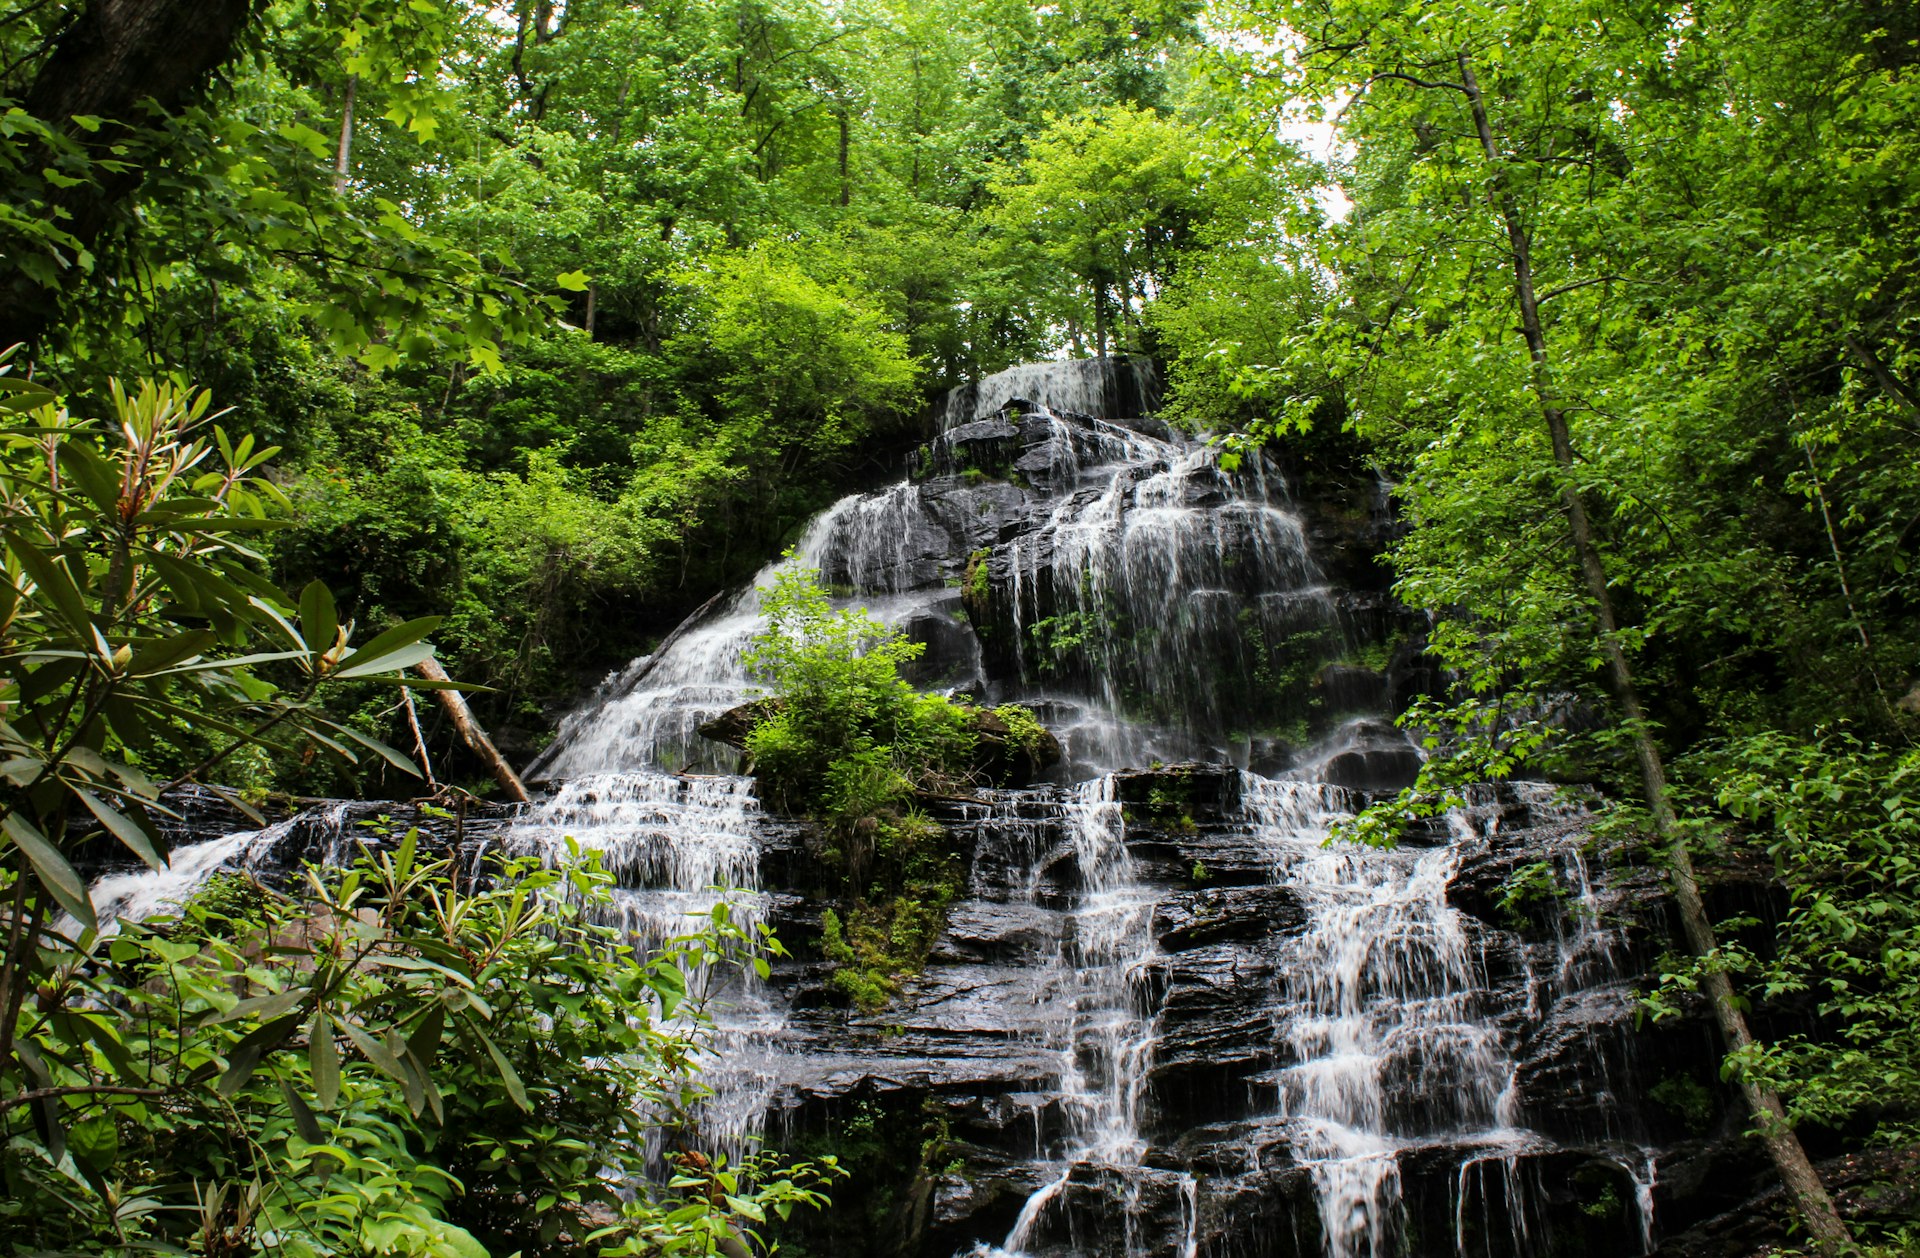 A rocky waterfall surrounded by green forest